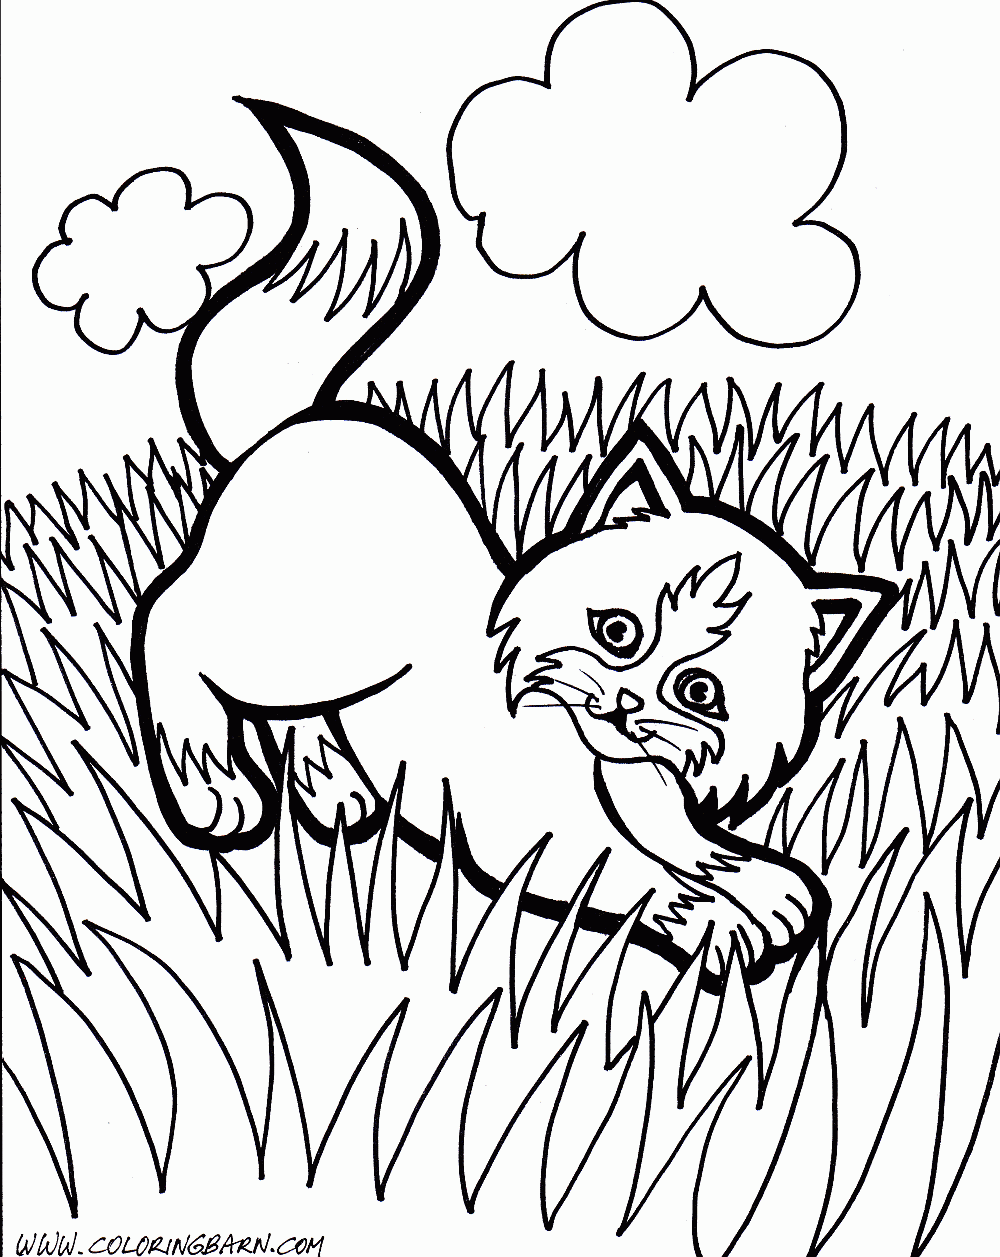 Kitten Coloring Pages | Coloring pages for Girls | #6